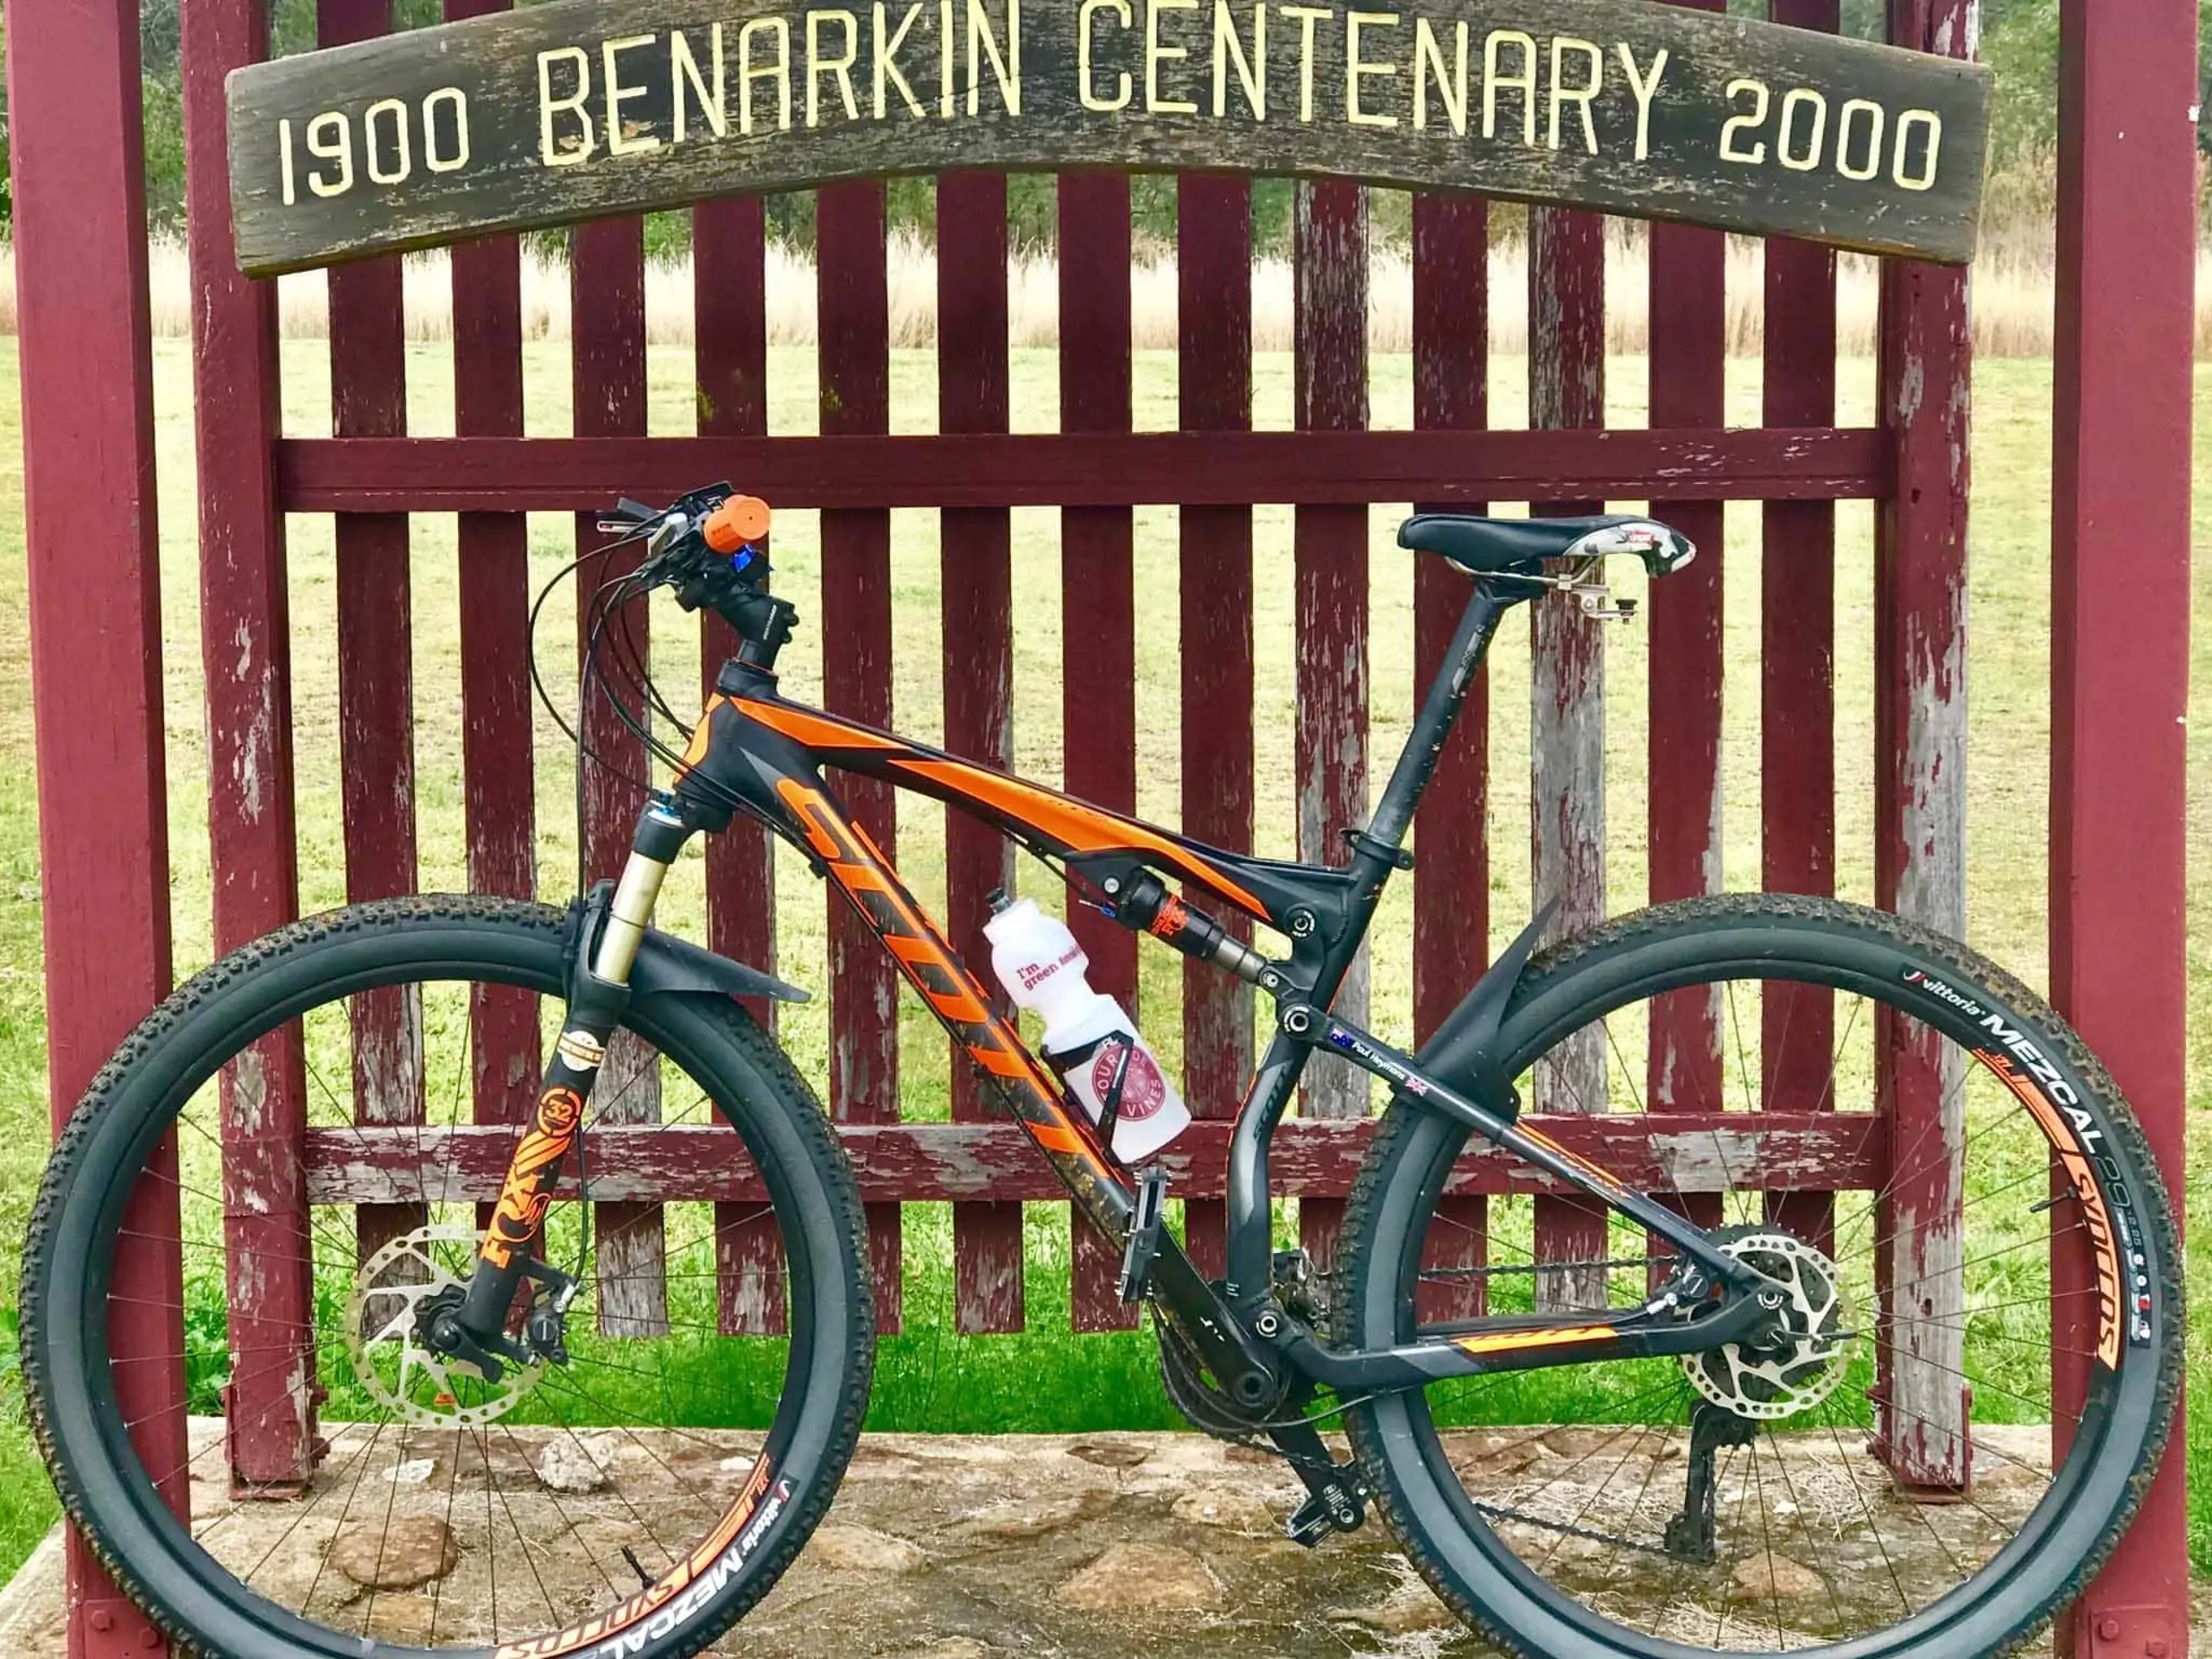 Bike parked near cementary entrance in Queensland